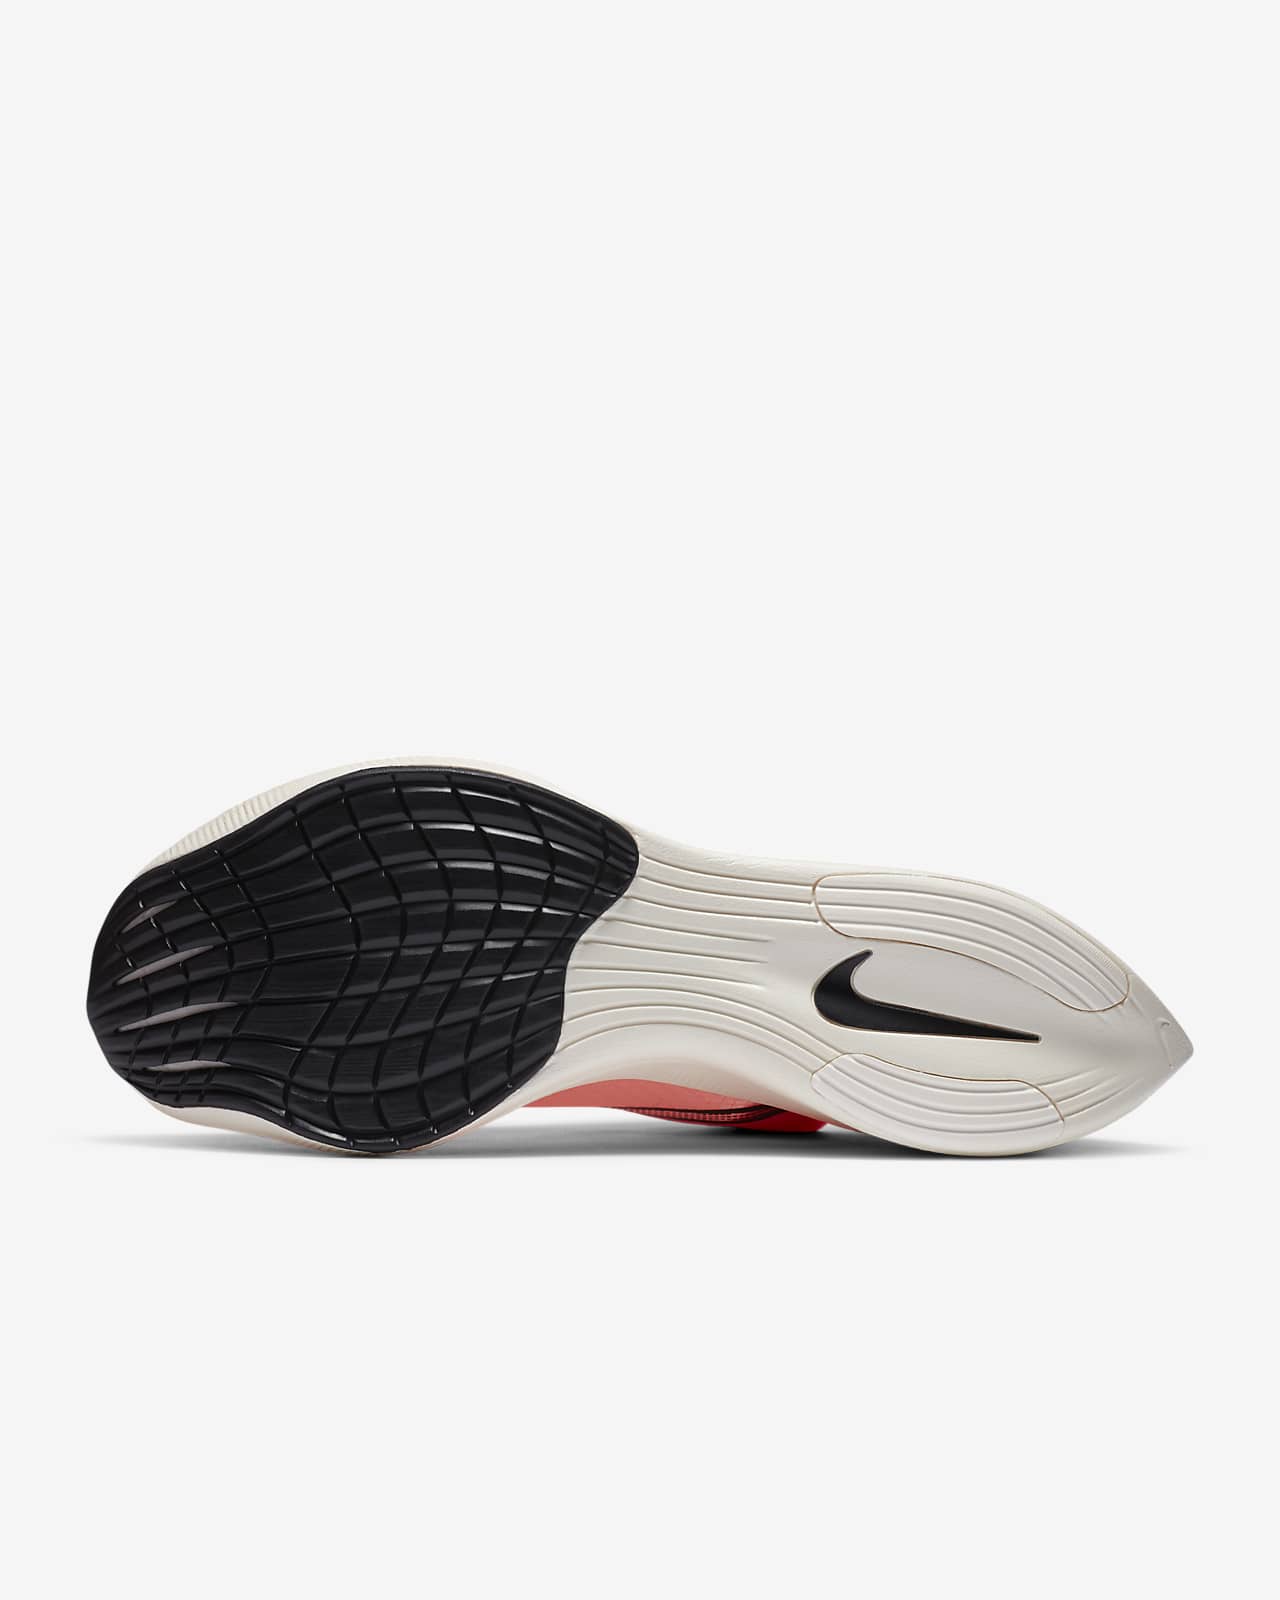 nike air zoomx vaporfly